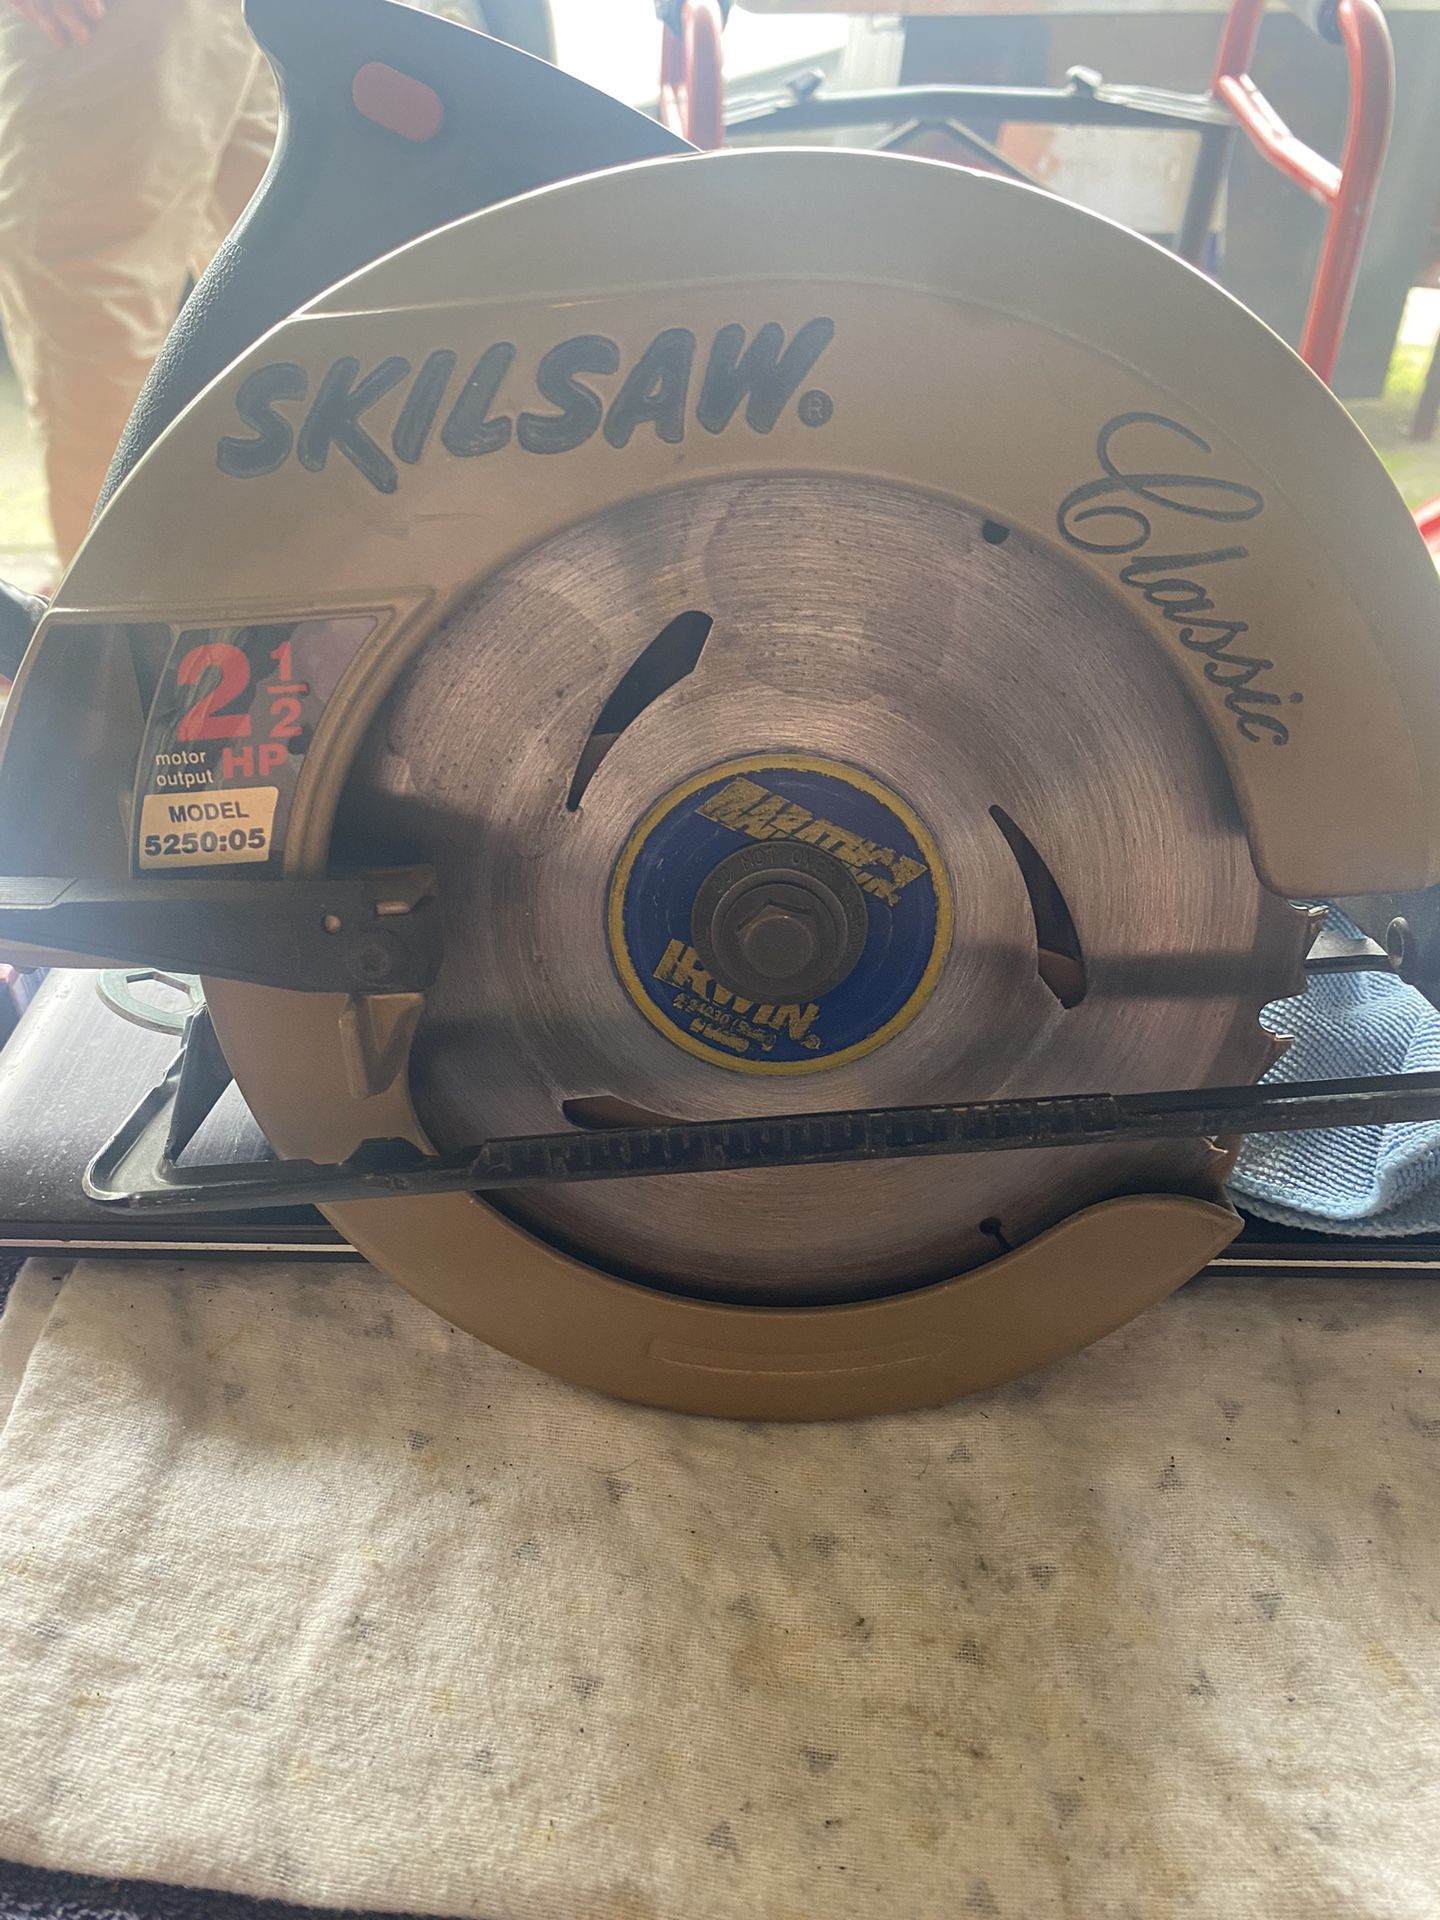 Classic Skillsaw Circular Saw With Case Corded